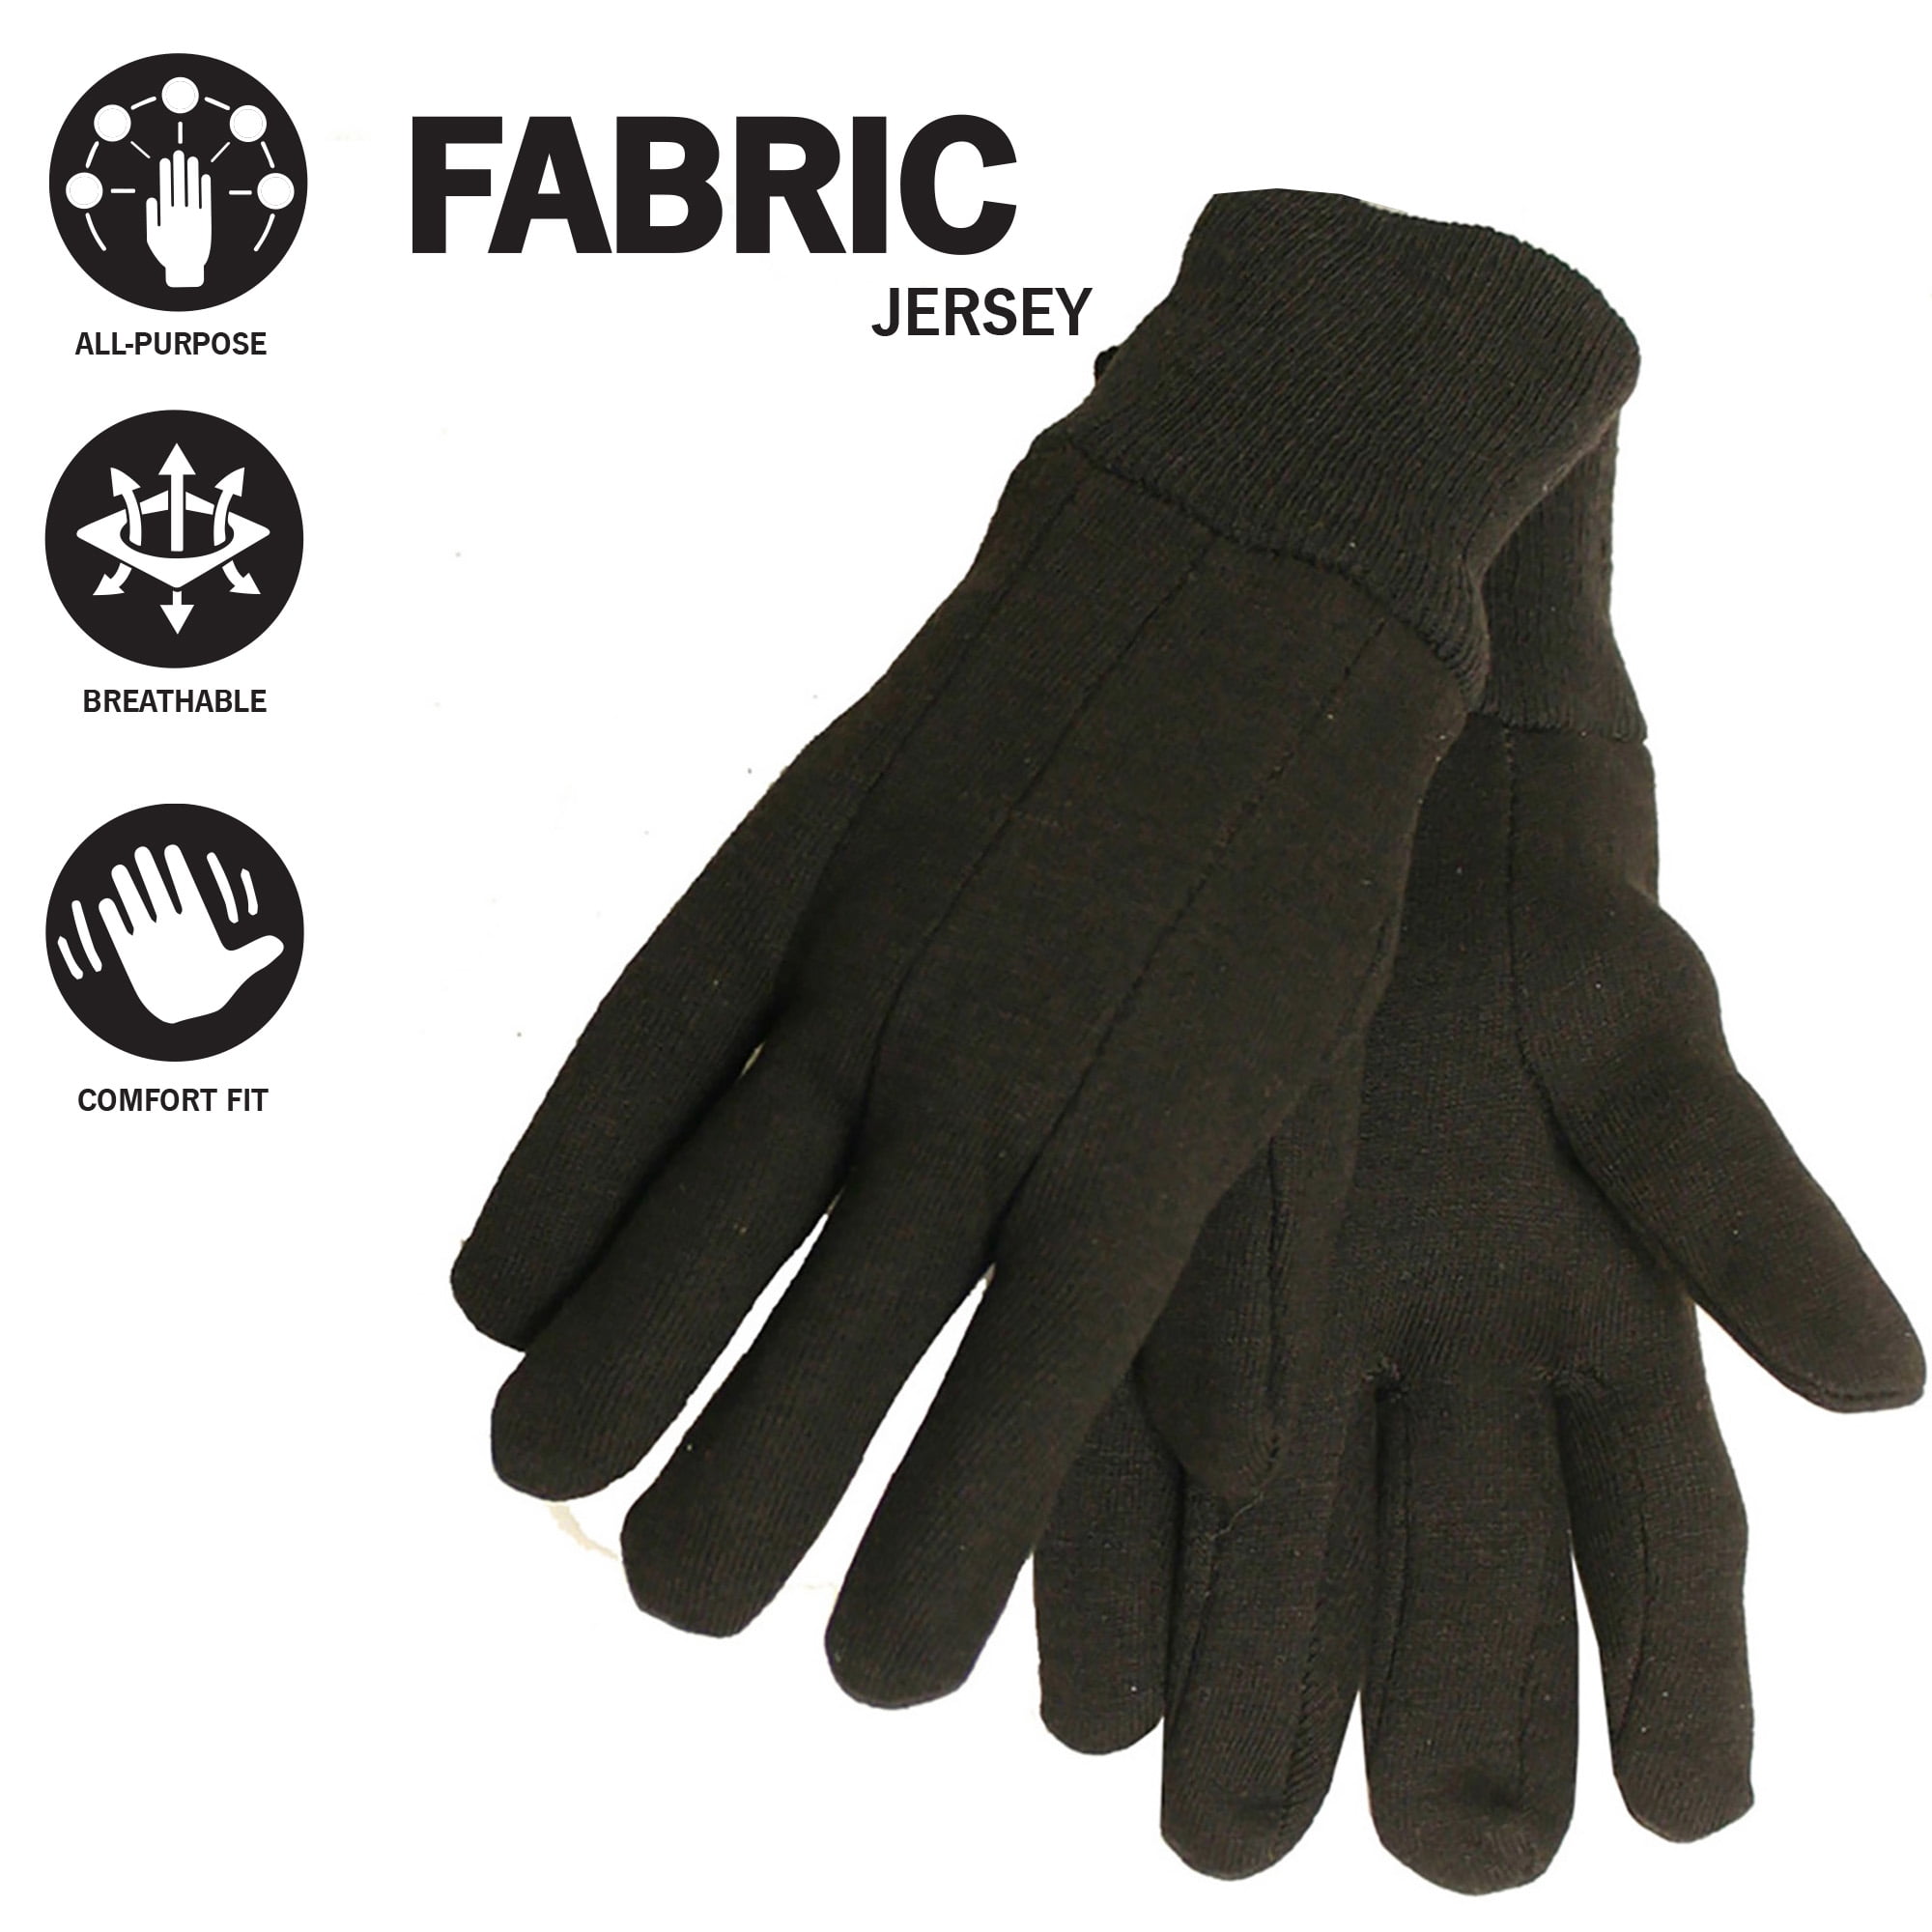 Big Time Products 92273-23 True Grip Cotton Jersey Work Gloves, Brown, Men's,  Large, 3-Pk.